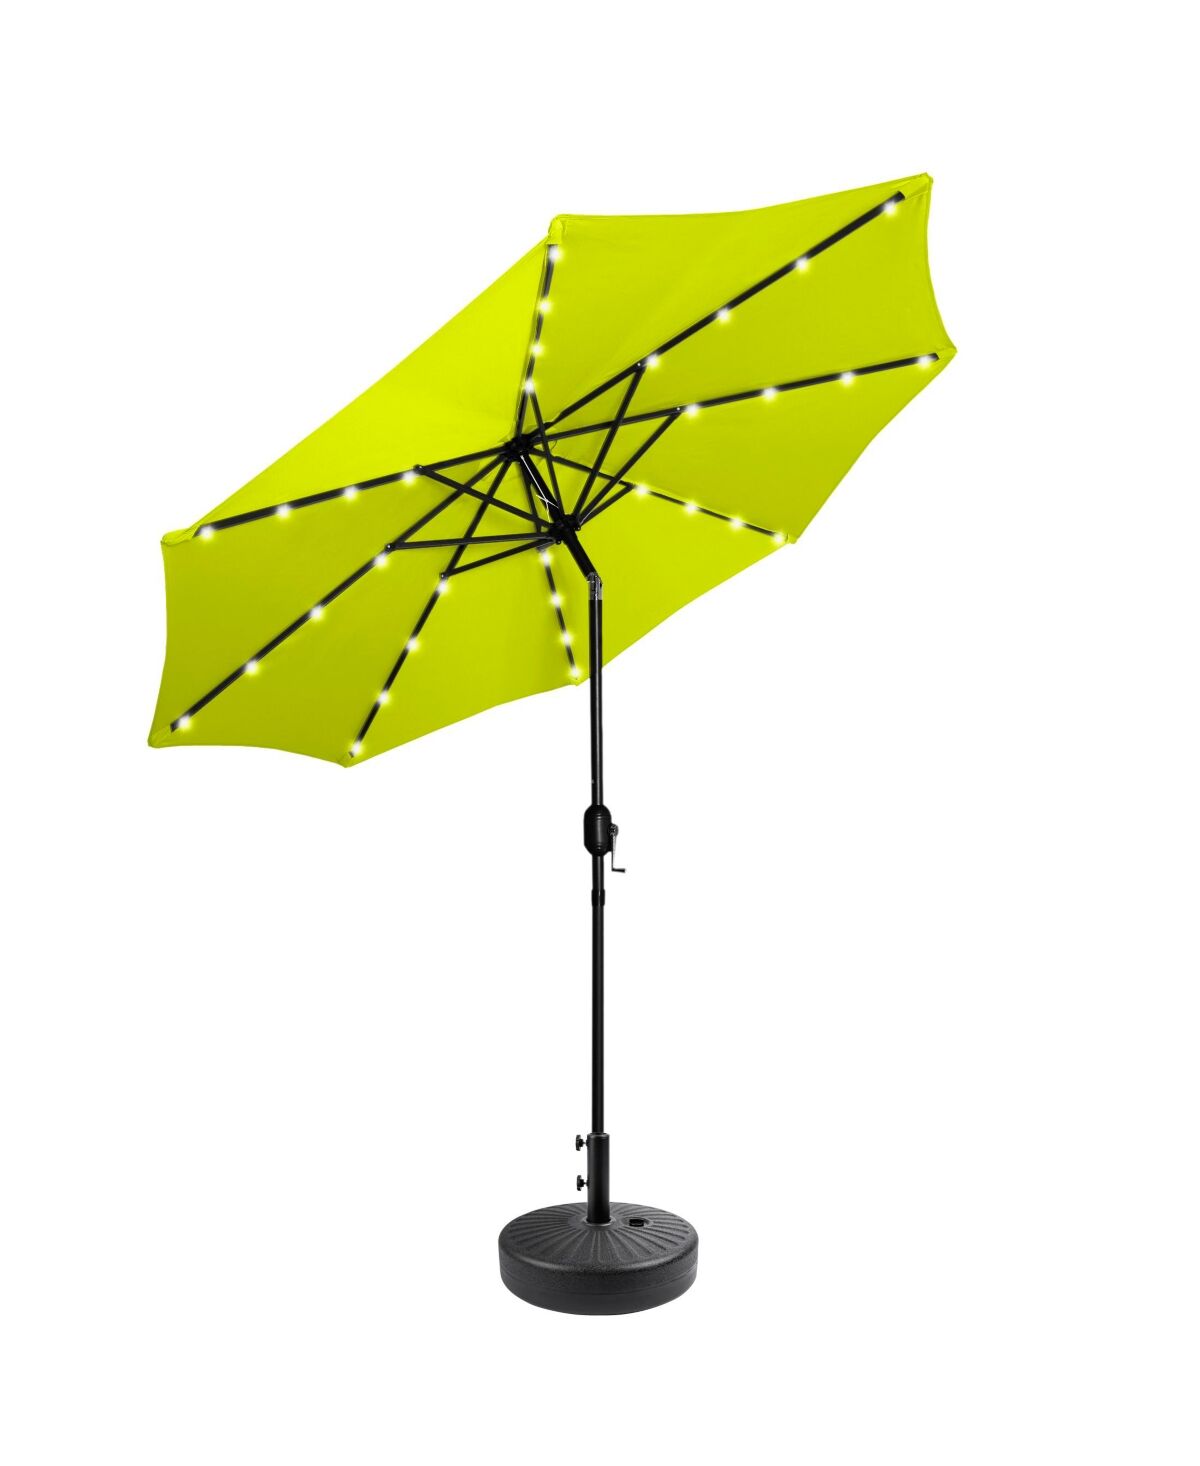 WestinTrends 9 ft. Patio Solar Power Led lights Market Umbrella with Black Round Base - Lime Green